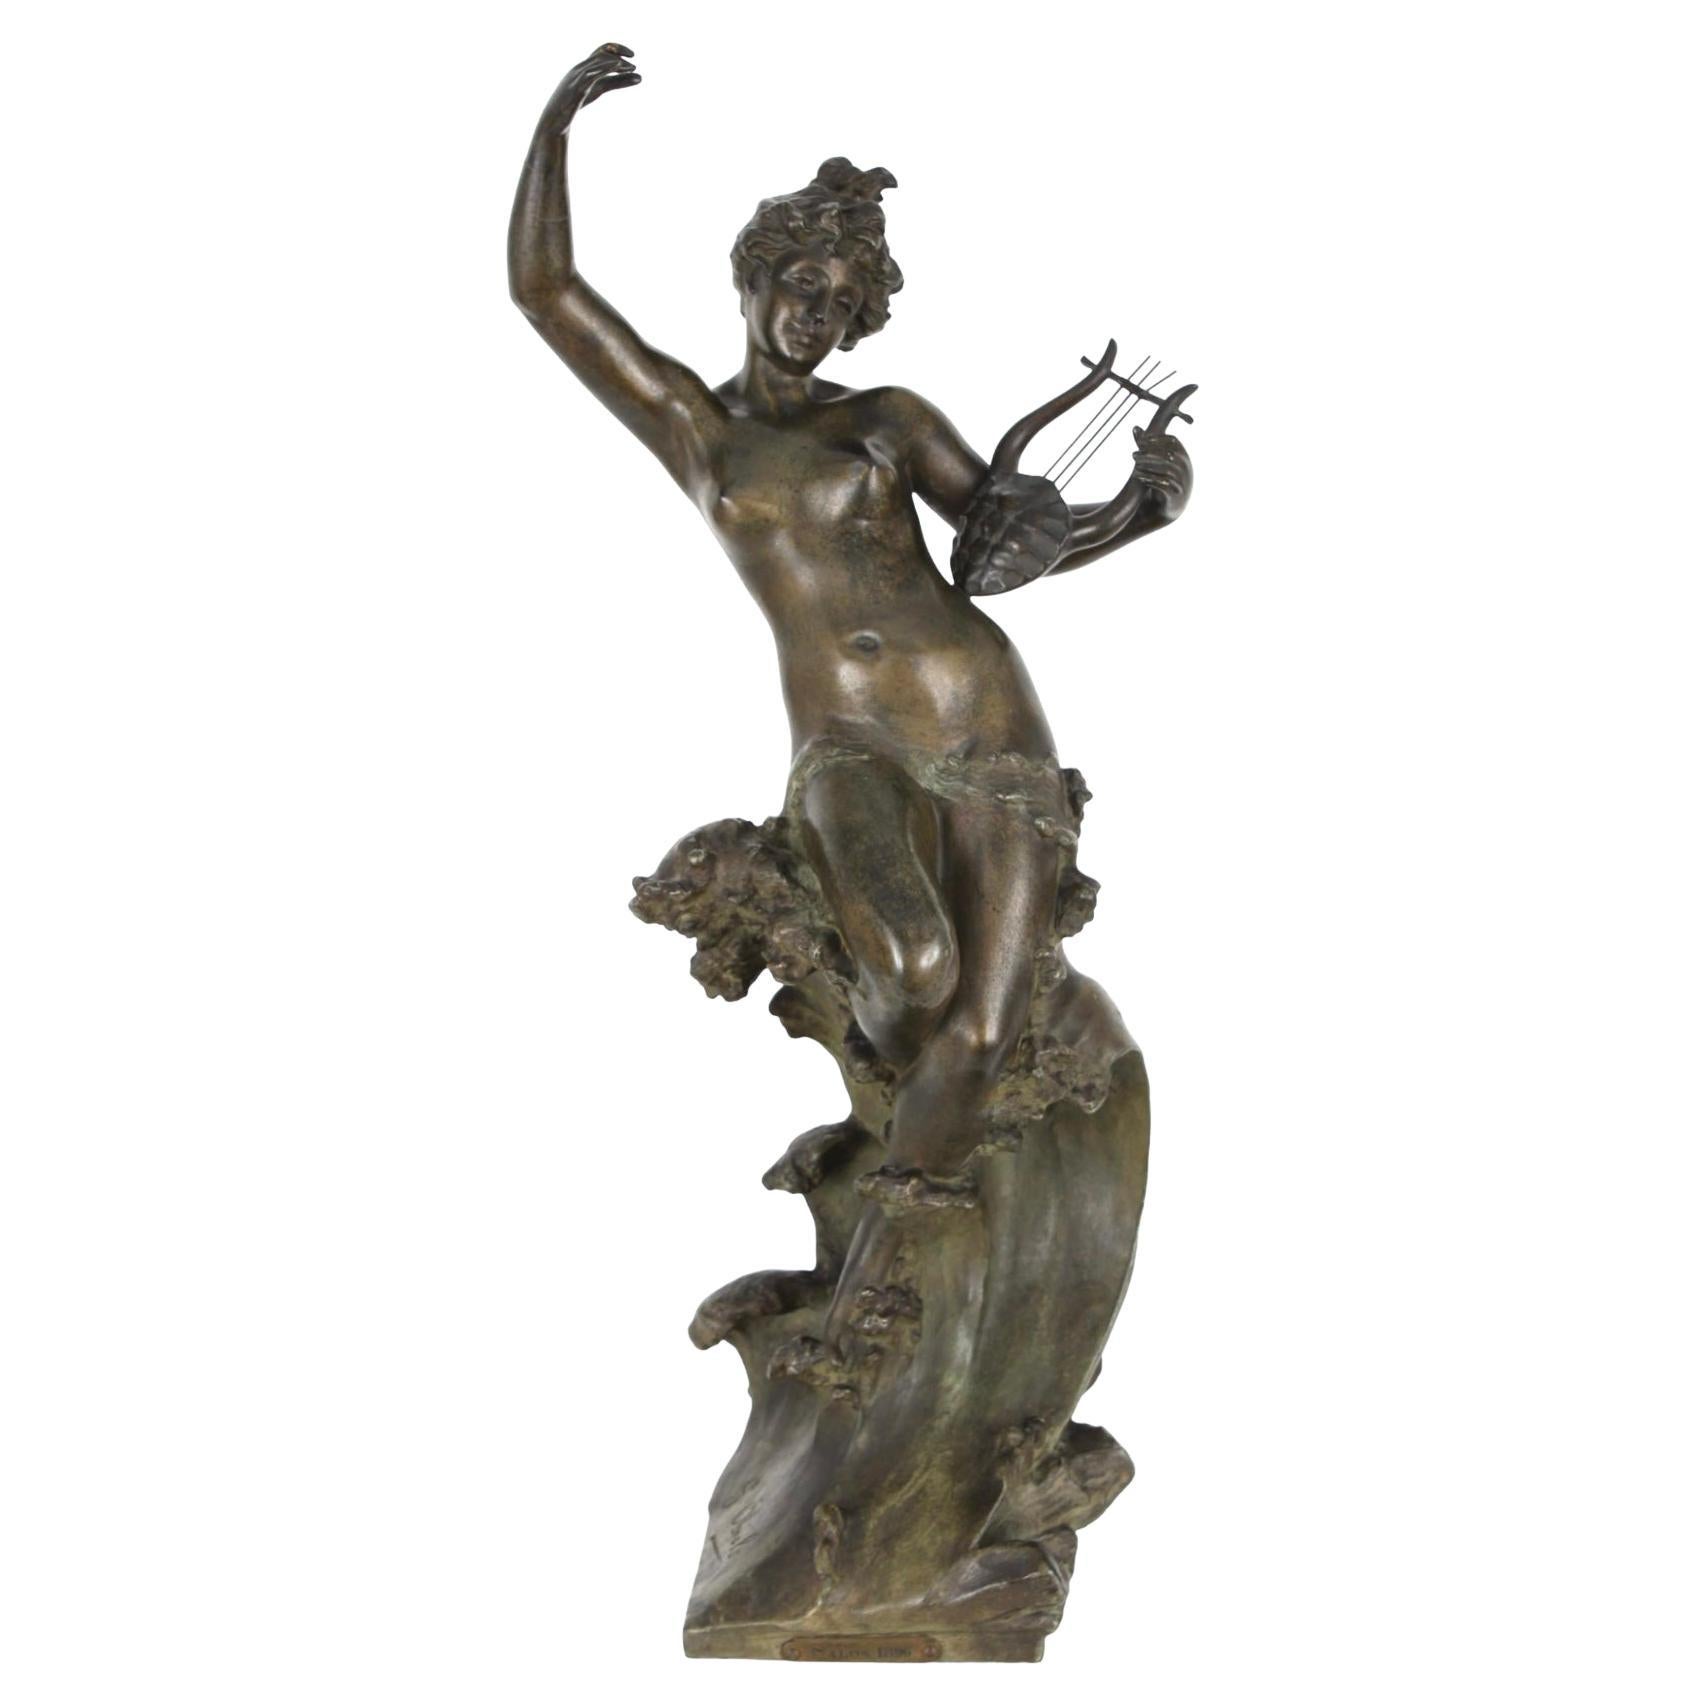 French Bronz Sculpture of Sea Nymph After Gustavo Obiols (1858-1910)